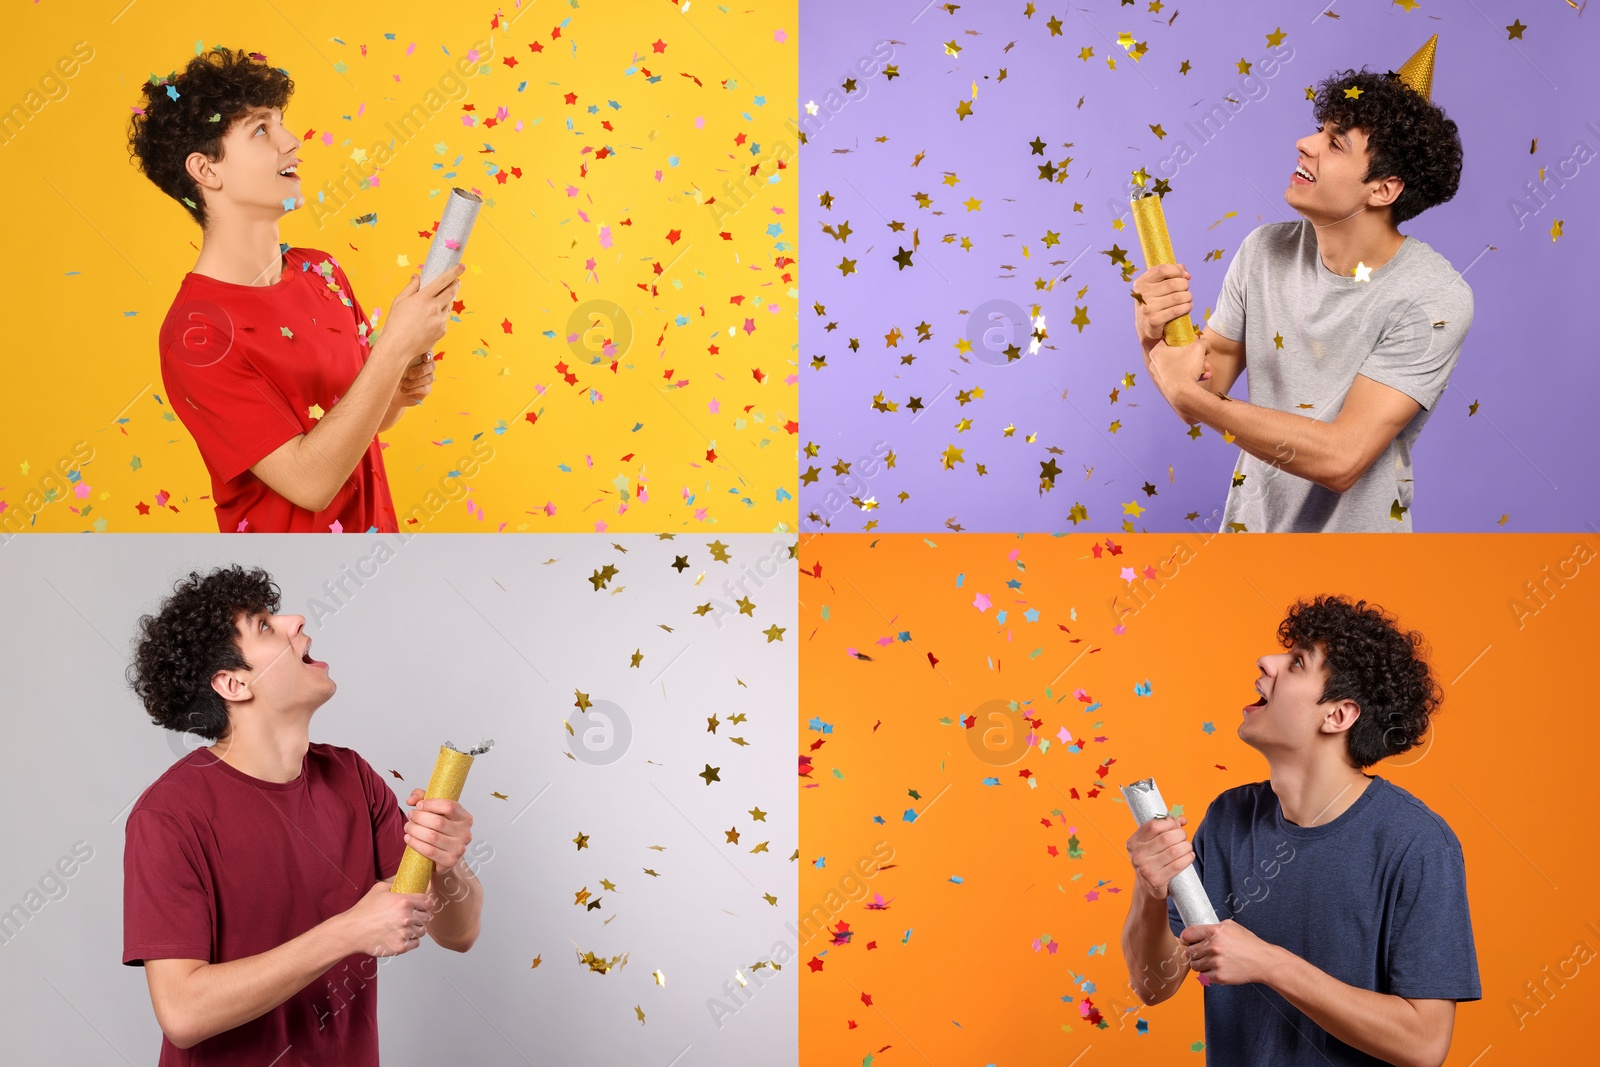 Image of Collage with photos of young men blowing up party poppers on different color backgrounds